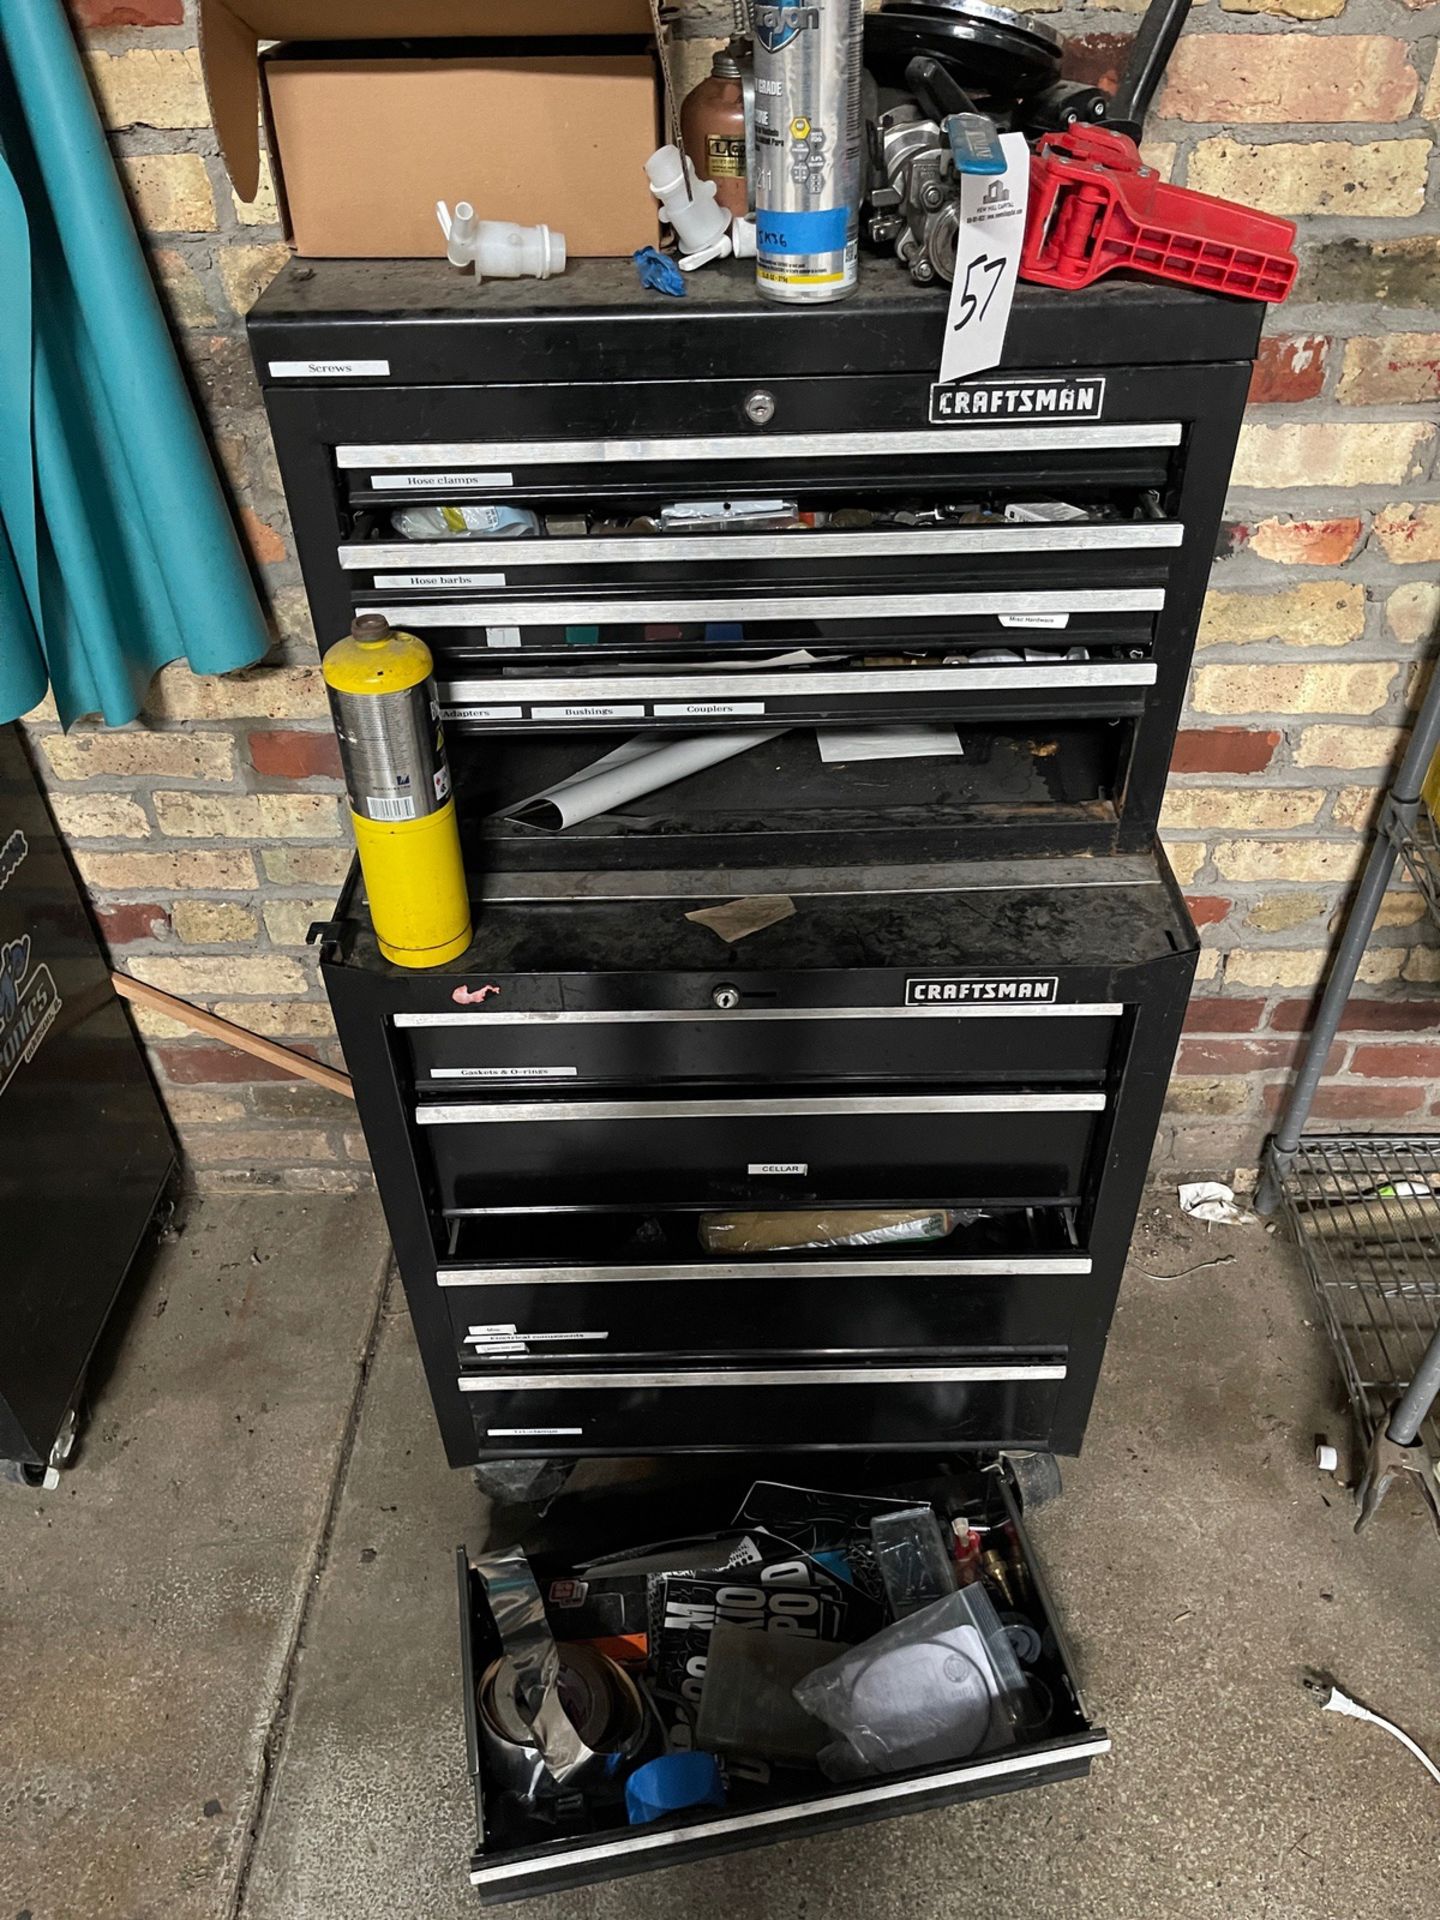 Craftsman Toolbox and Contents | Rig Fee $50